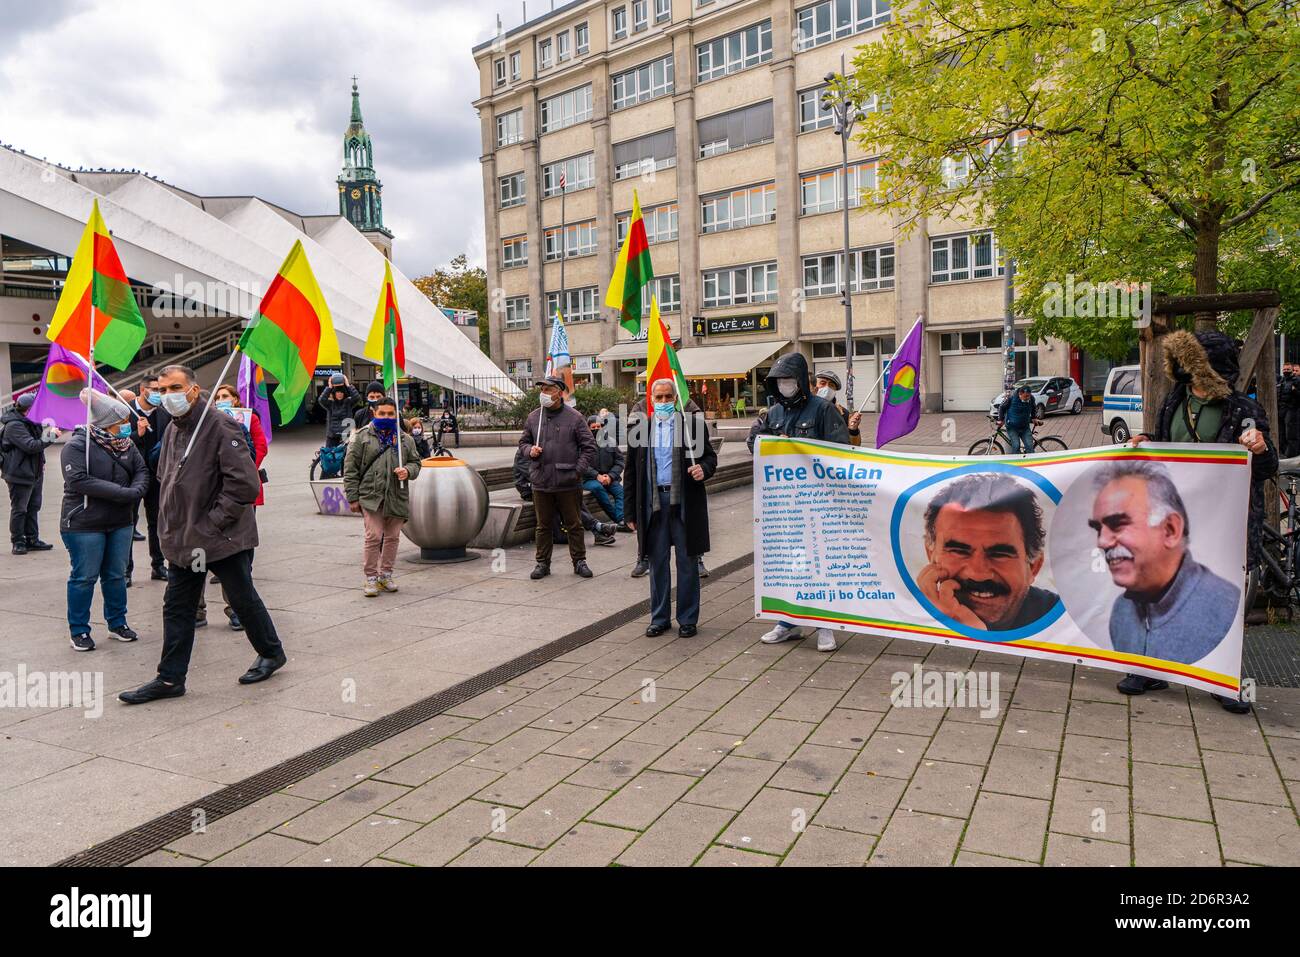 October 17, 2020, Berlin, supporters of Abdullah Ocalan demonstrate in a small group in front of the train station on Berlin's Alexanderplatz with banners and signs for the release of the former PKK leader who has been imprisoned since 1999. Ocalan is sentenced to life imprisonment. Most of the demonstrators carry the flag of the Kurdish Democratic Union Party (Partiya Yekîtiya Demokrat), which is said to be close to the PKK. | usage worldwide Stock Photo